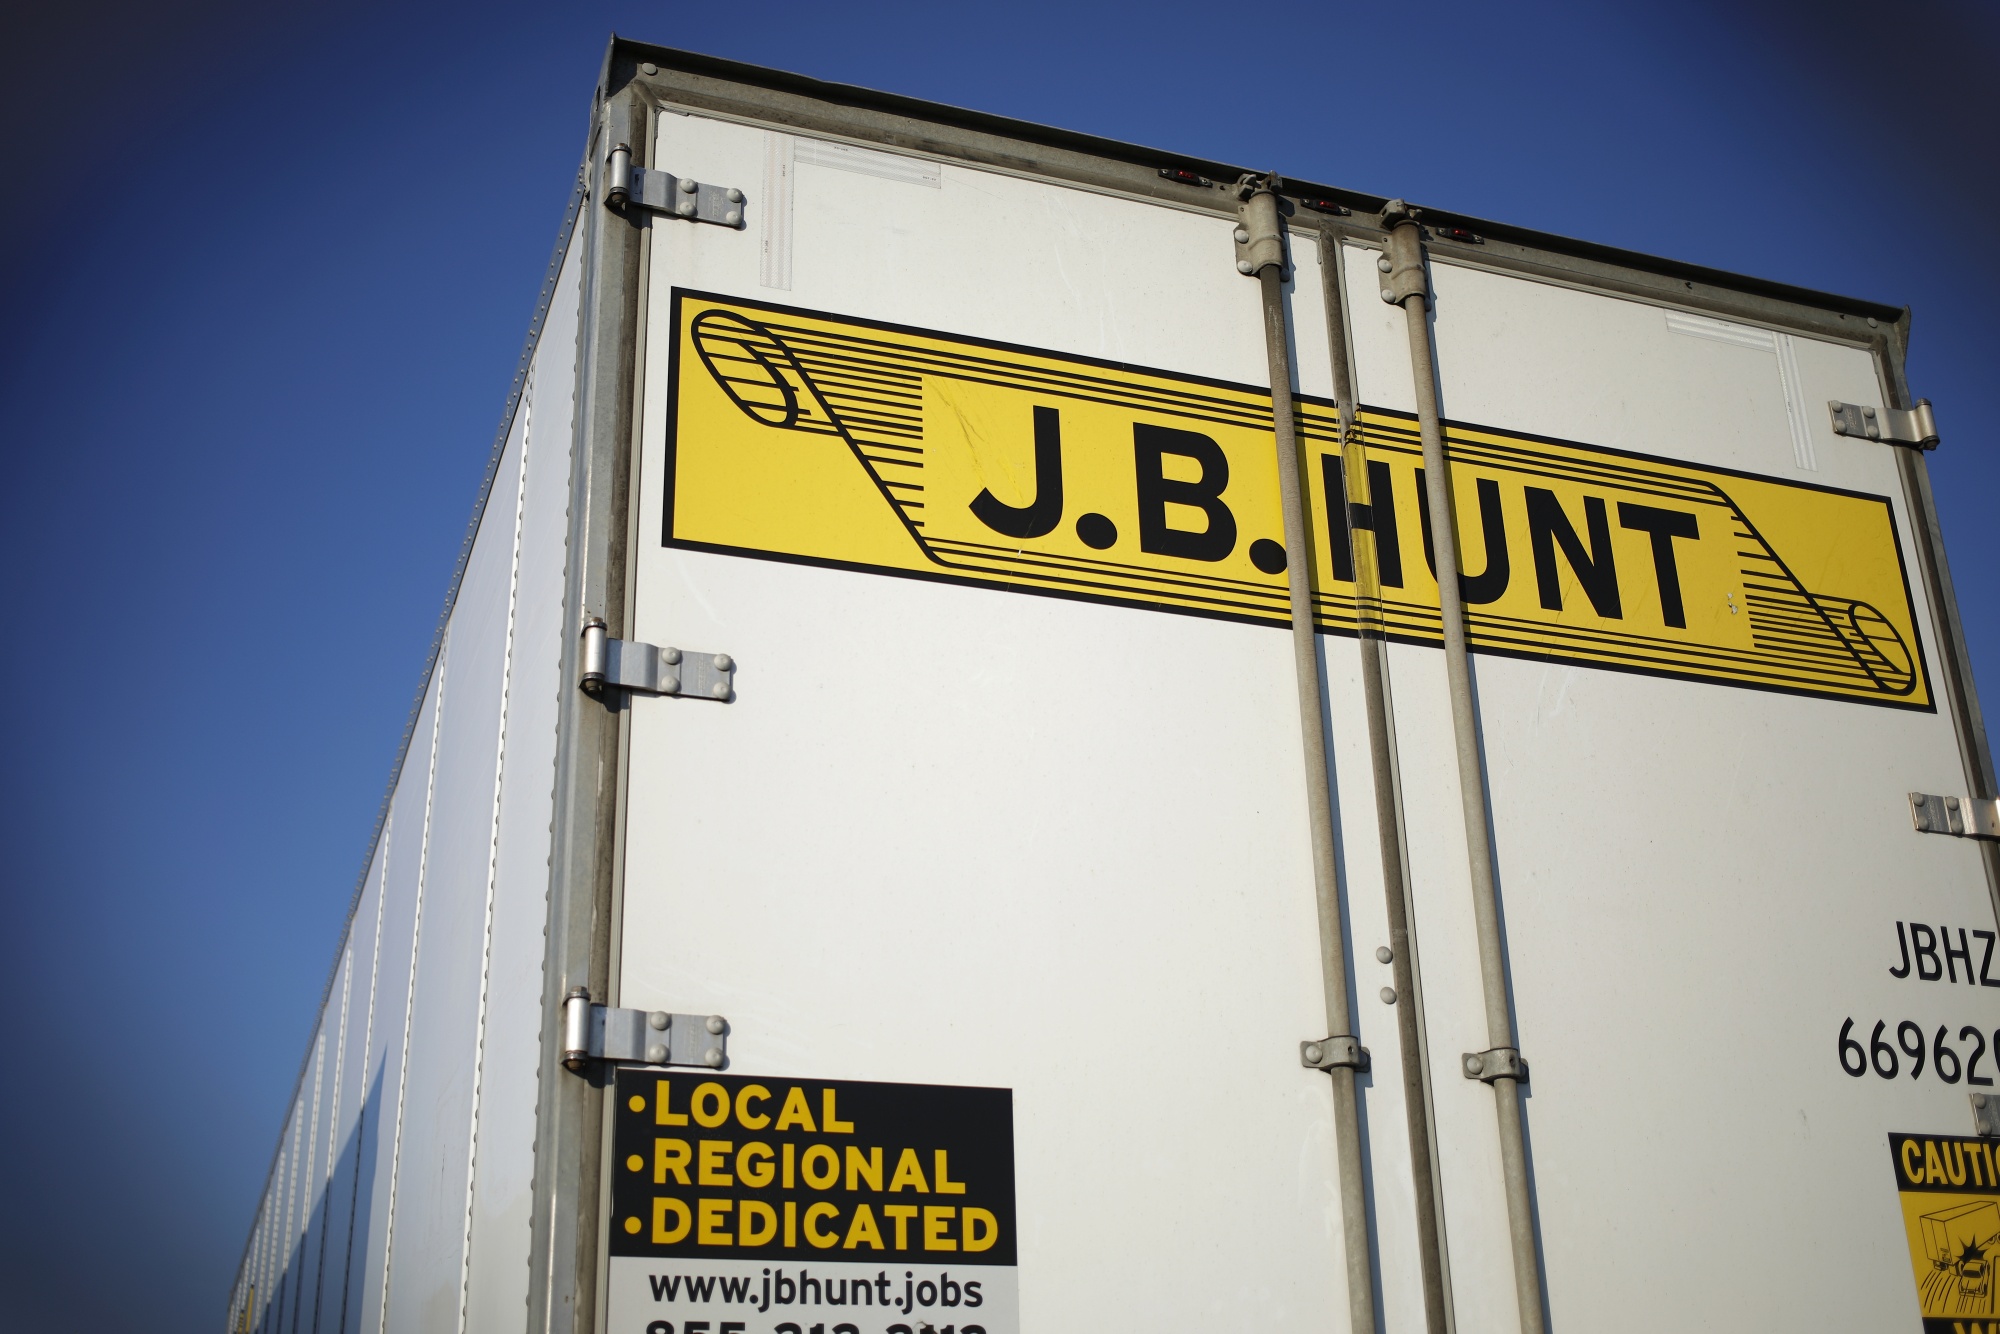 J.B. Hunt Sees Intermodal Cargo Driven by CostCutting Shippers Bloomberg